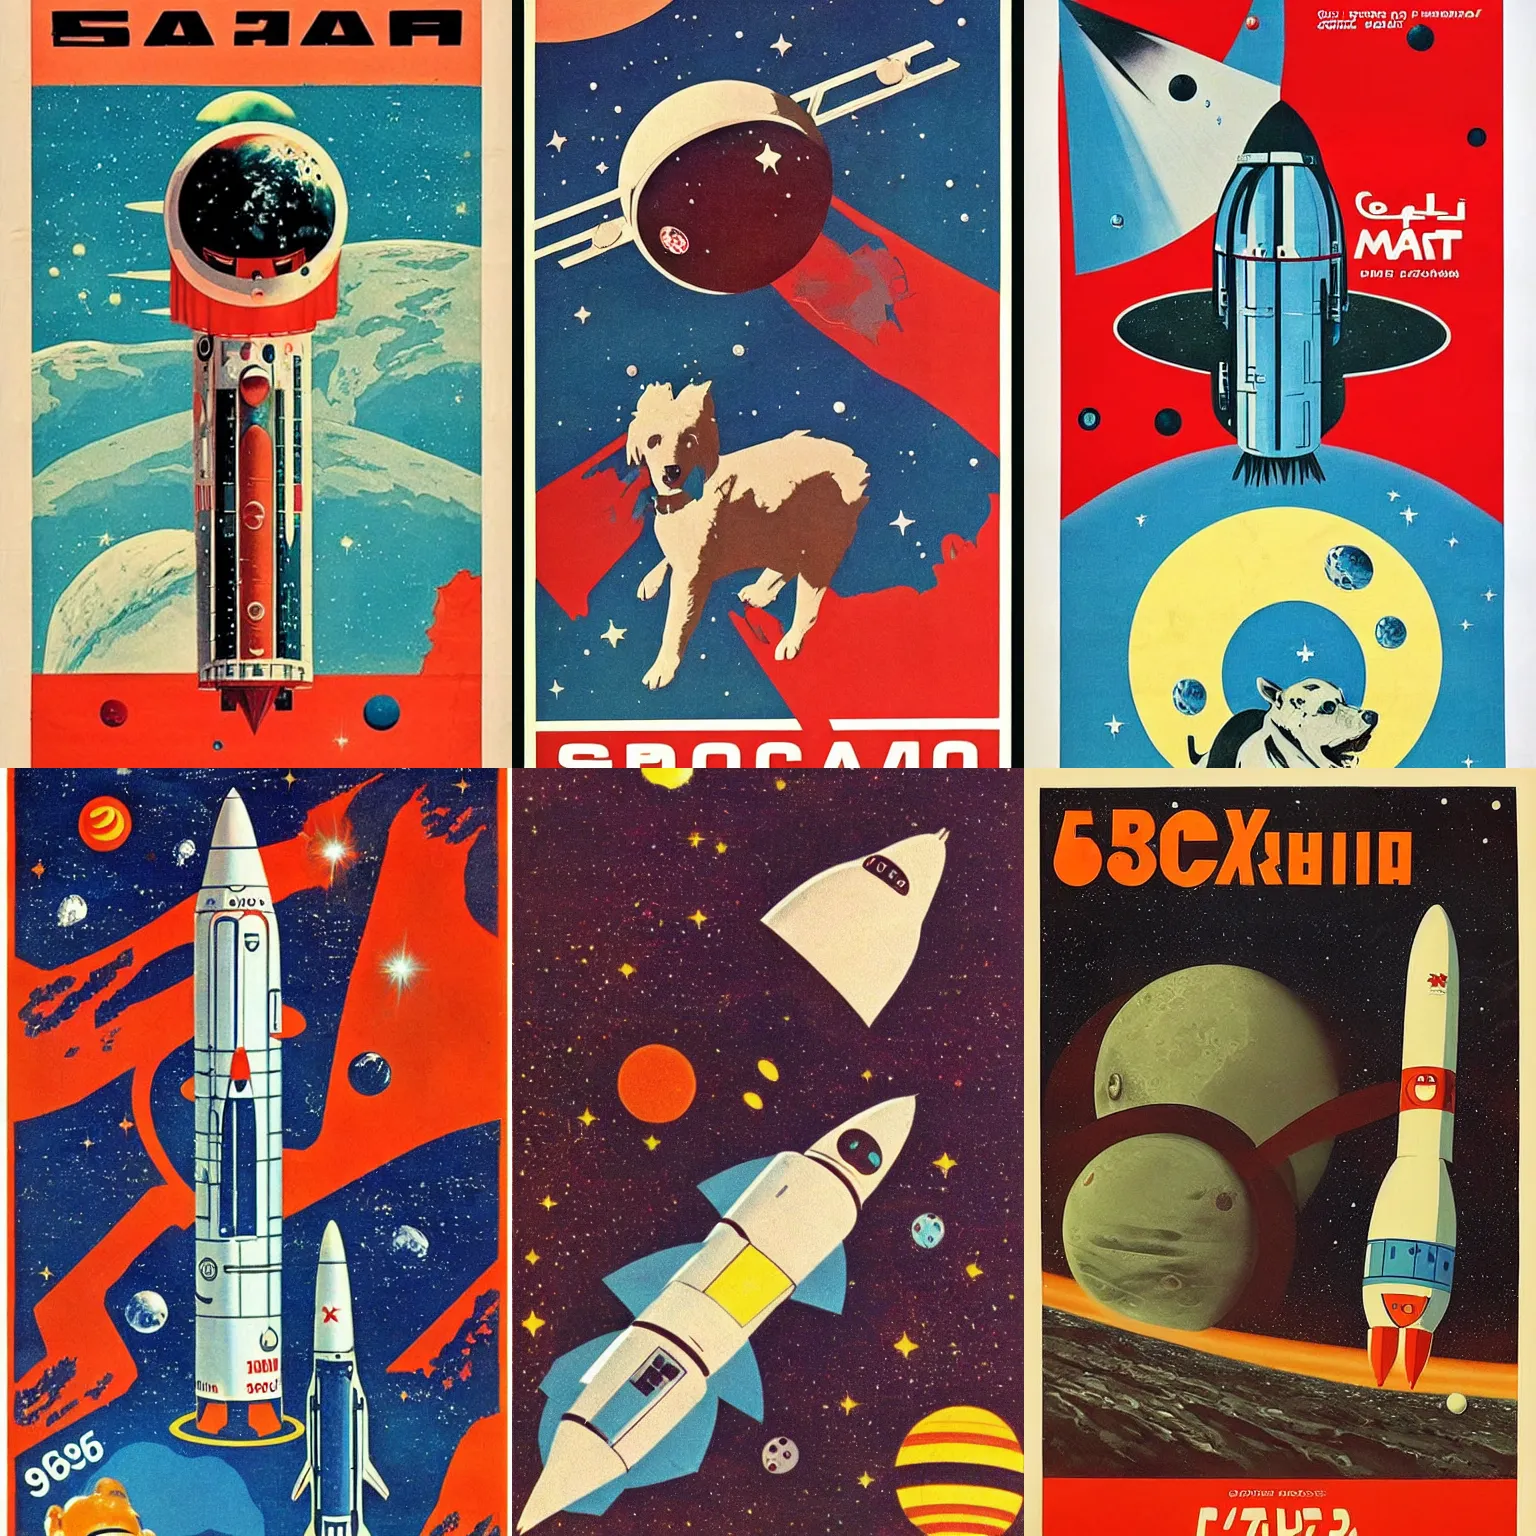 Prompt: Soviet dog shaped Space craft, planet mars, 60s poster, 1962 Soviet